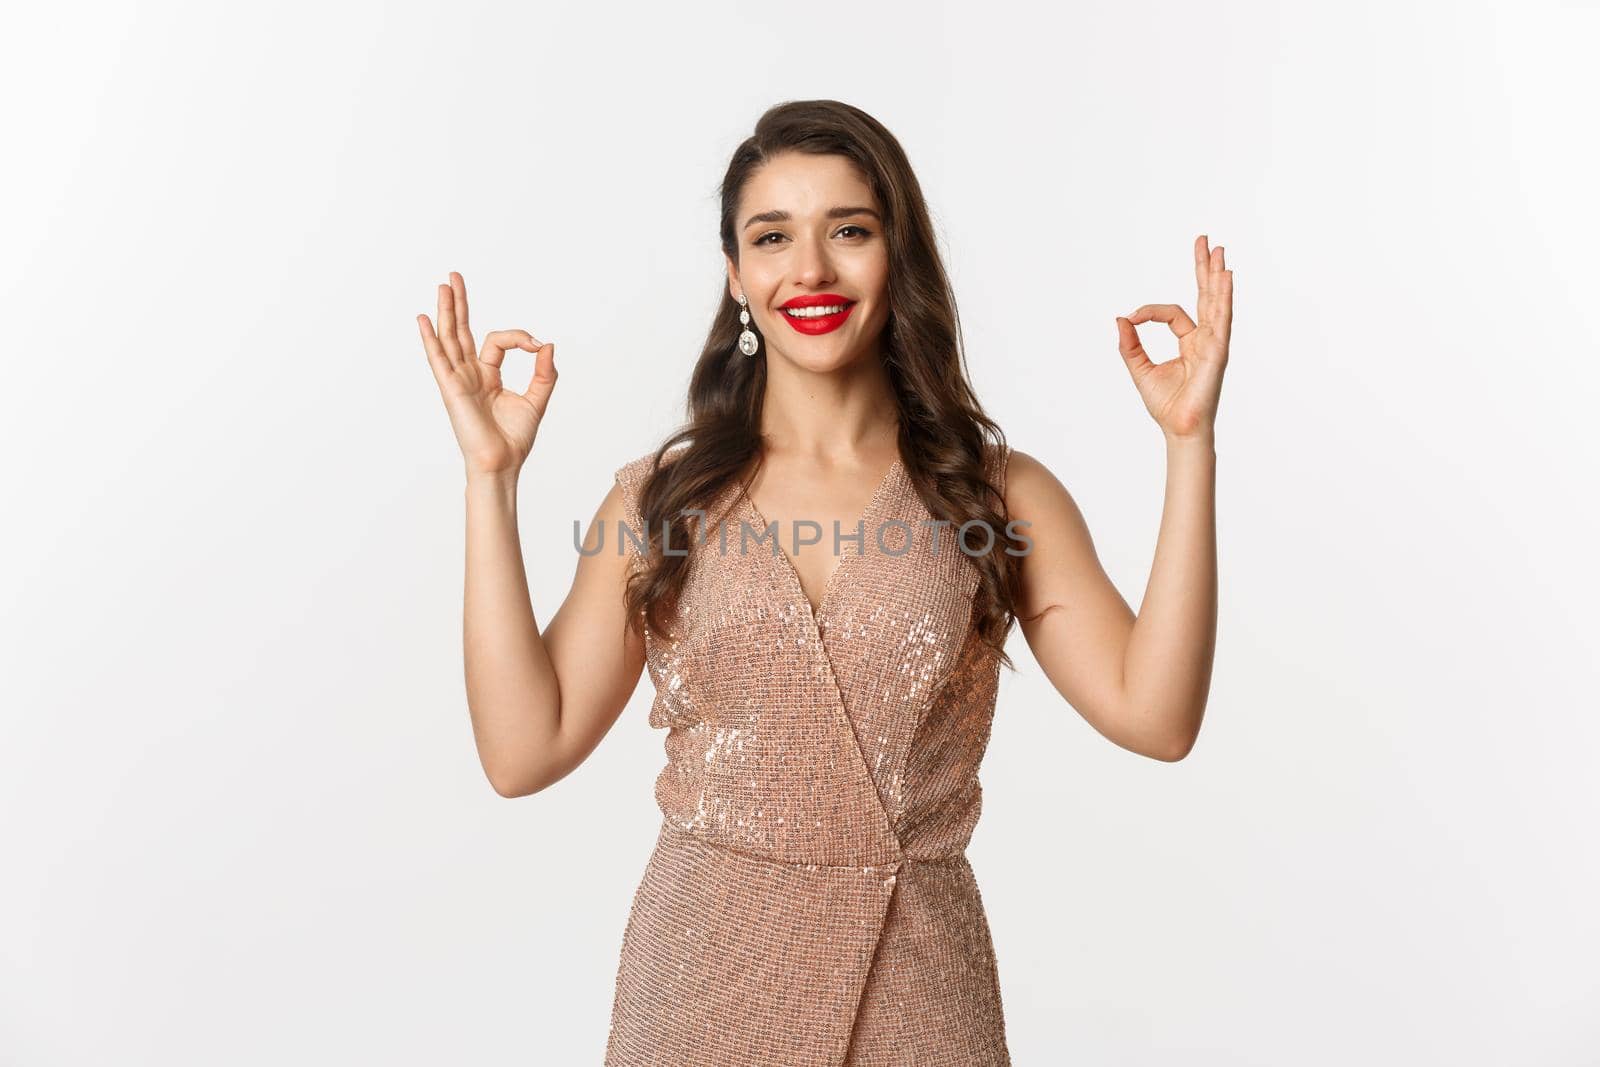 Portrait of satisfied beautiful woman recommending something, showing okay signs and smiling in approval, agree or like promo, standing in luxury party dress, white background.